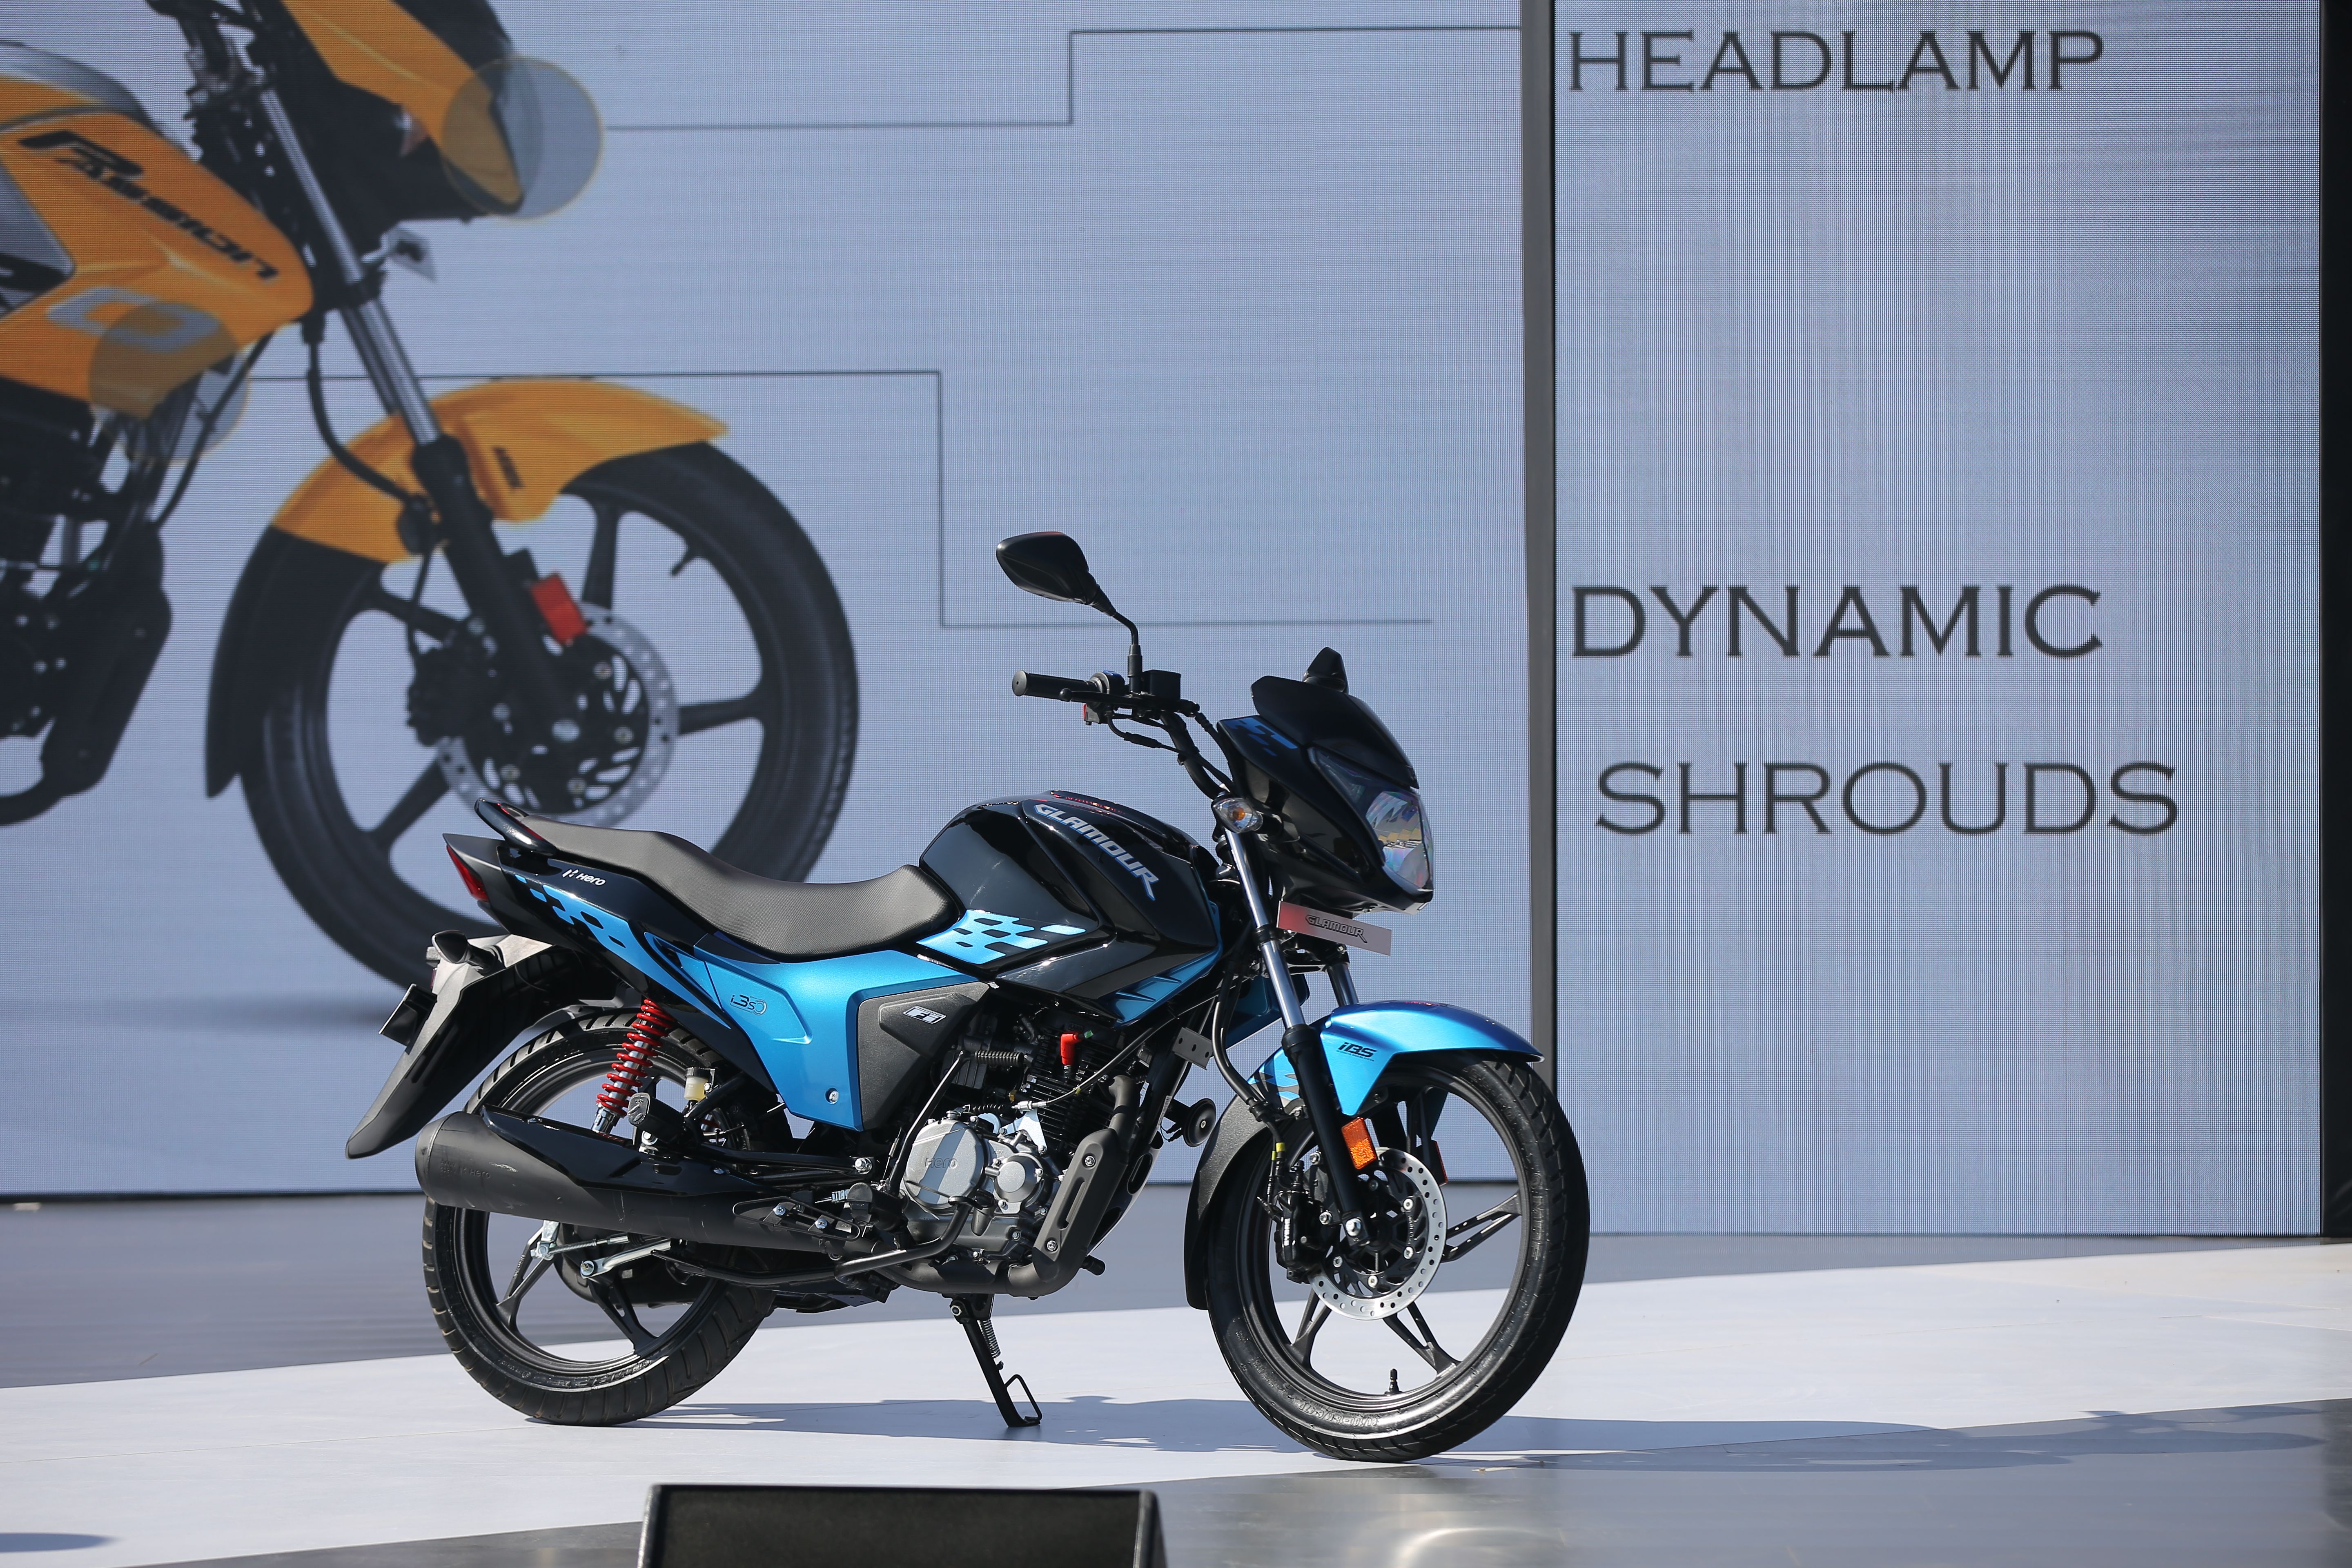 Hero Motocorp Finally Launches The 2020 Glamour 125 Bs6